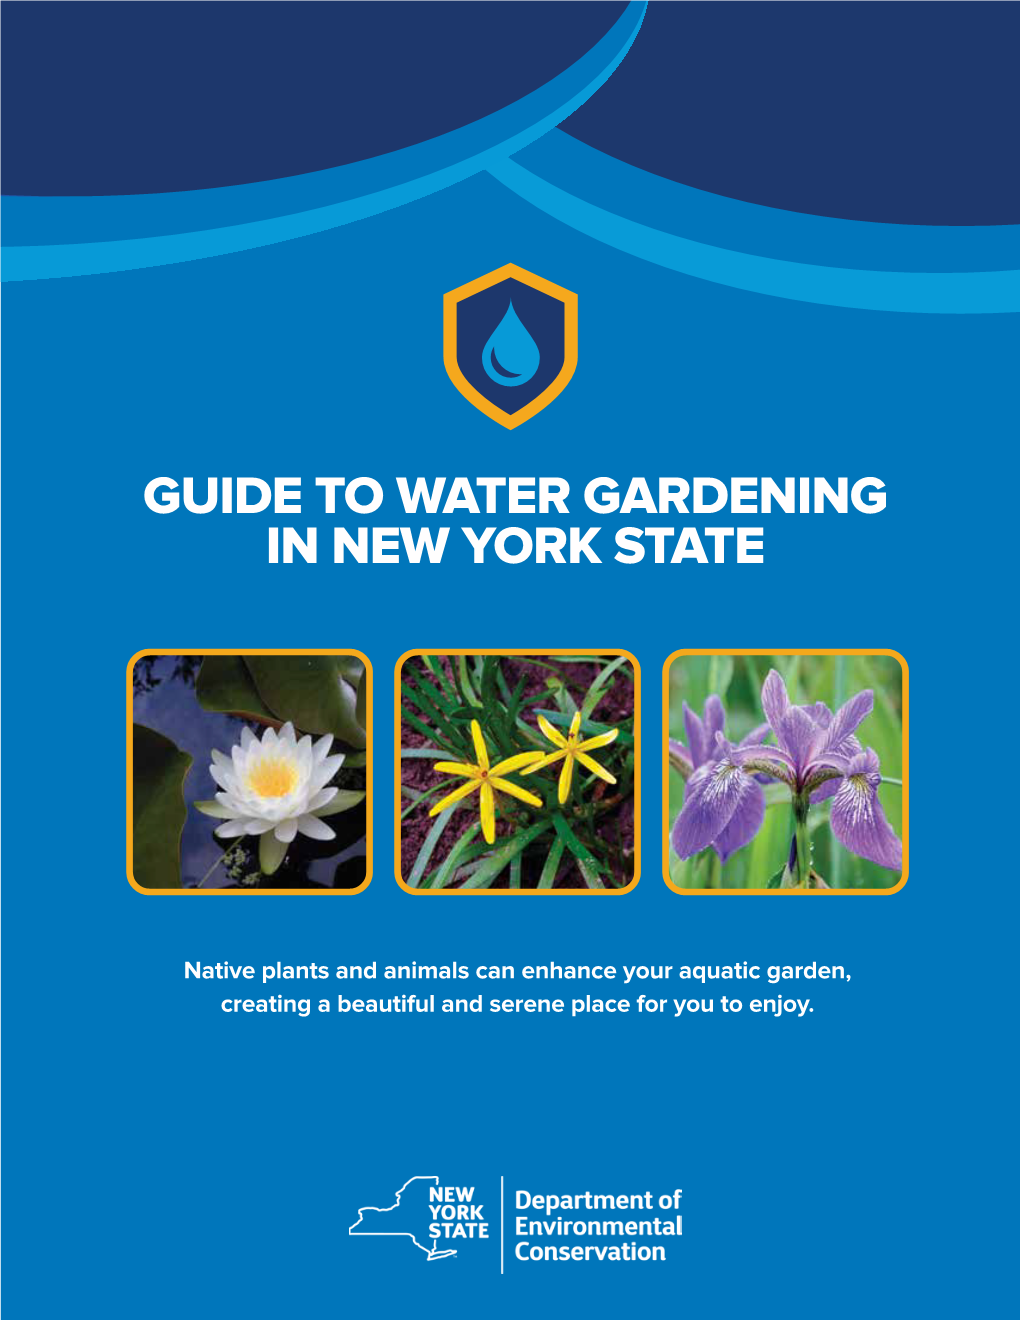 Guide to Water Gardening in New York State